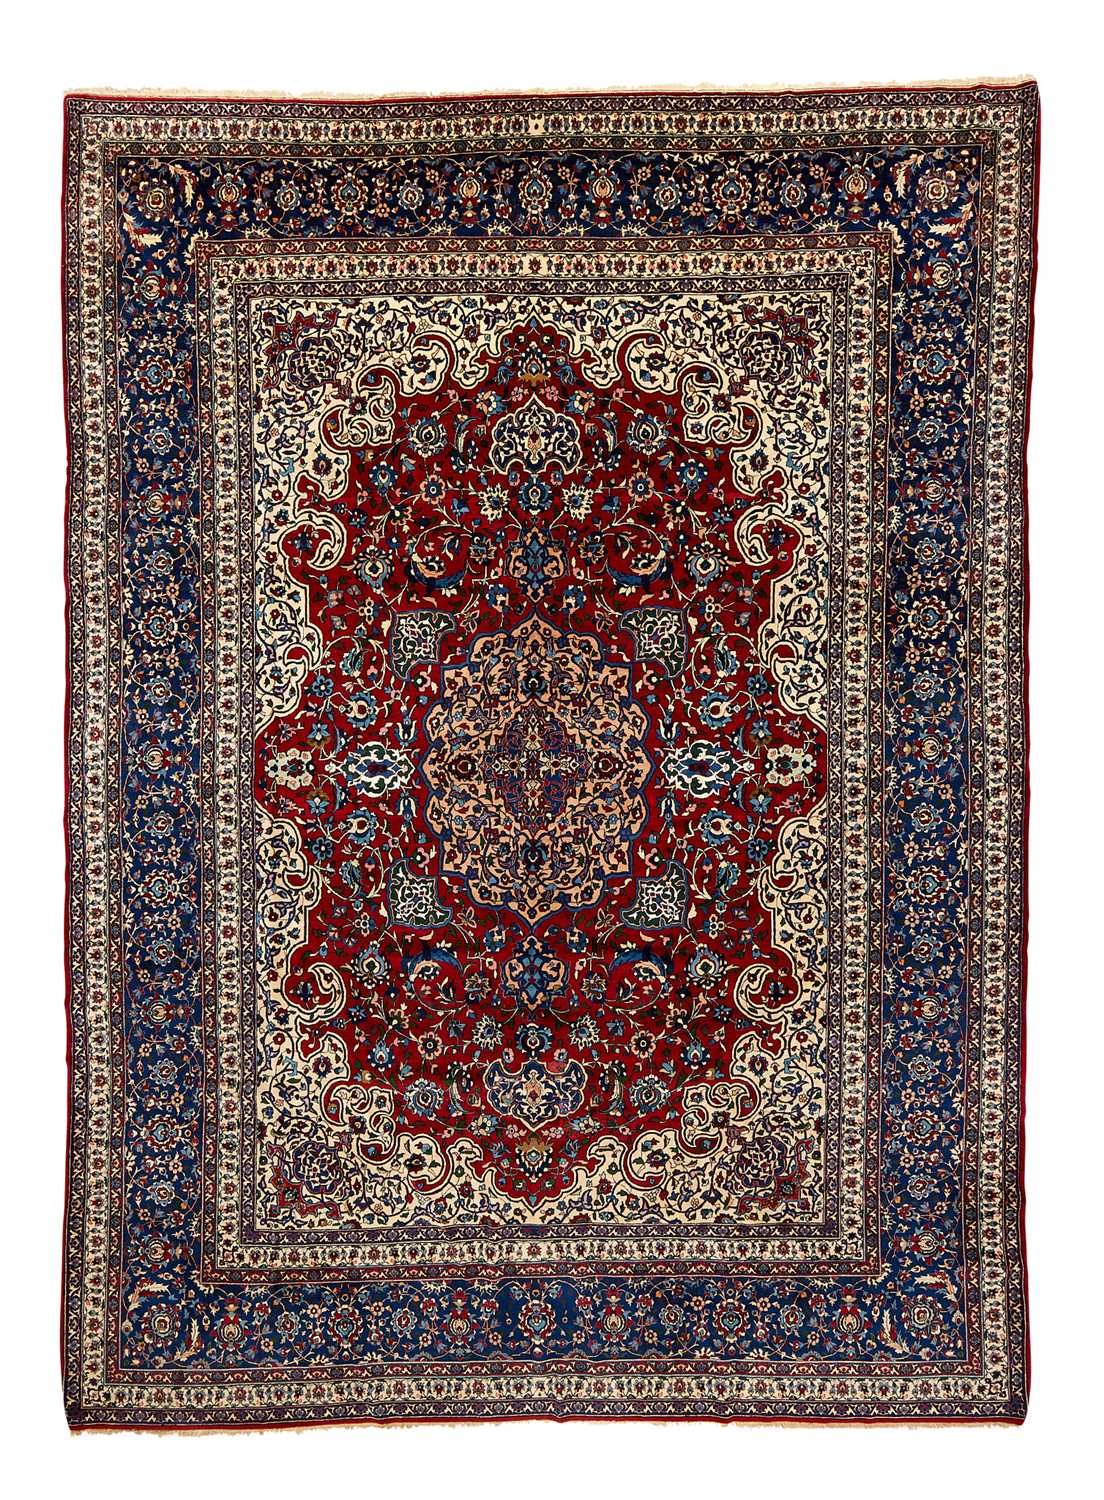 AN ISFAHAN PART SILK CARPET, NORTH WEST PERSIA